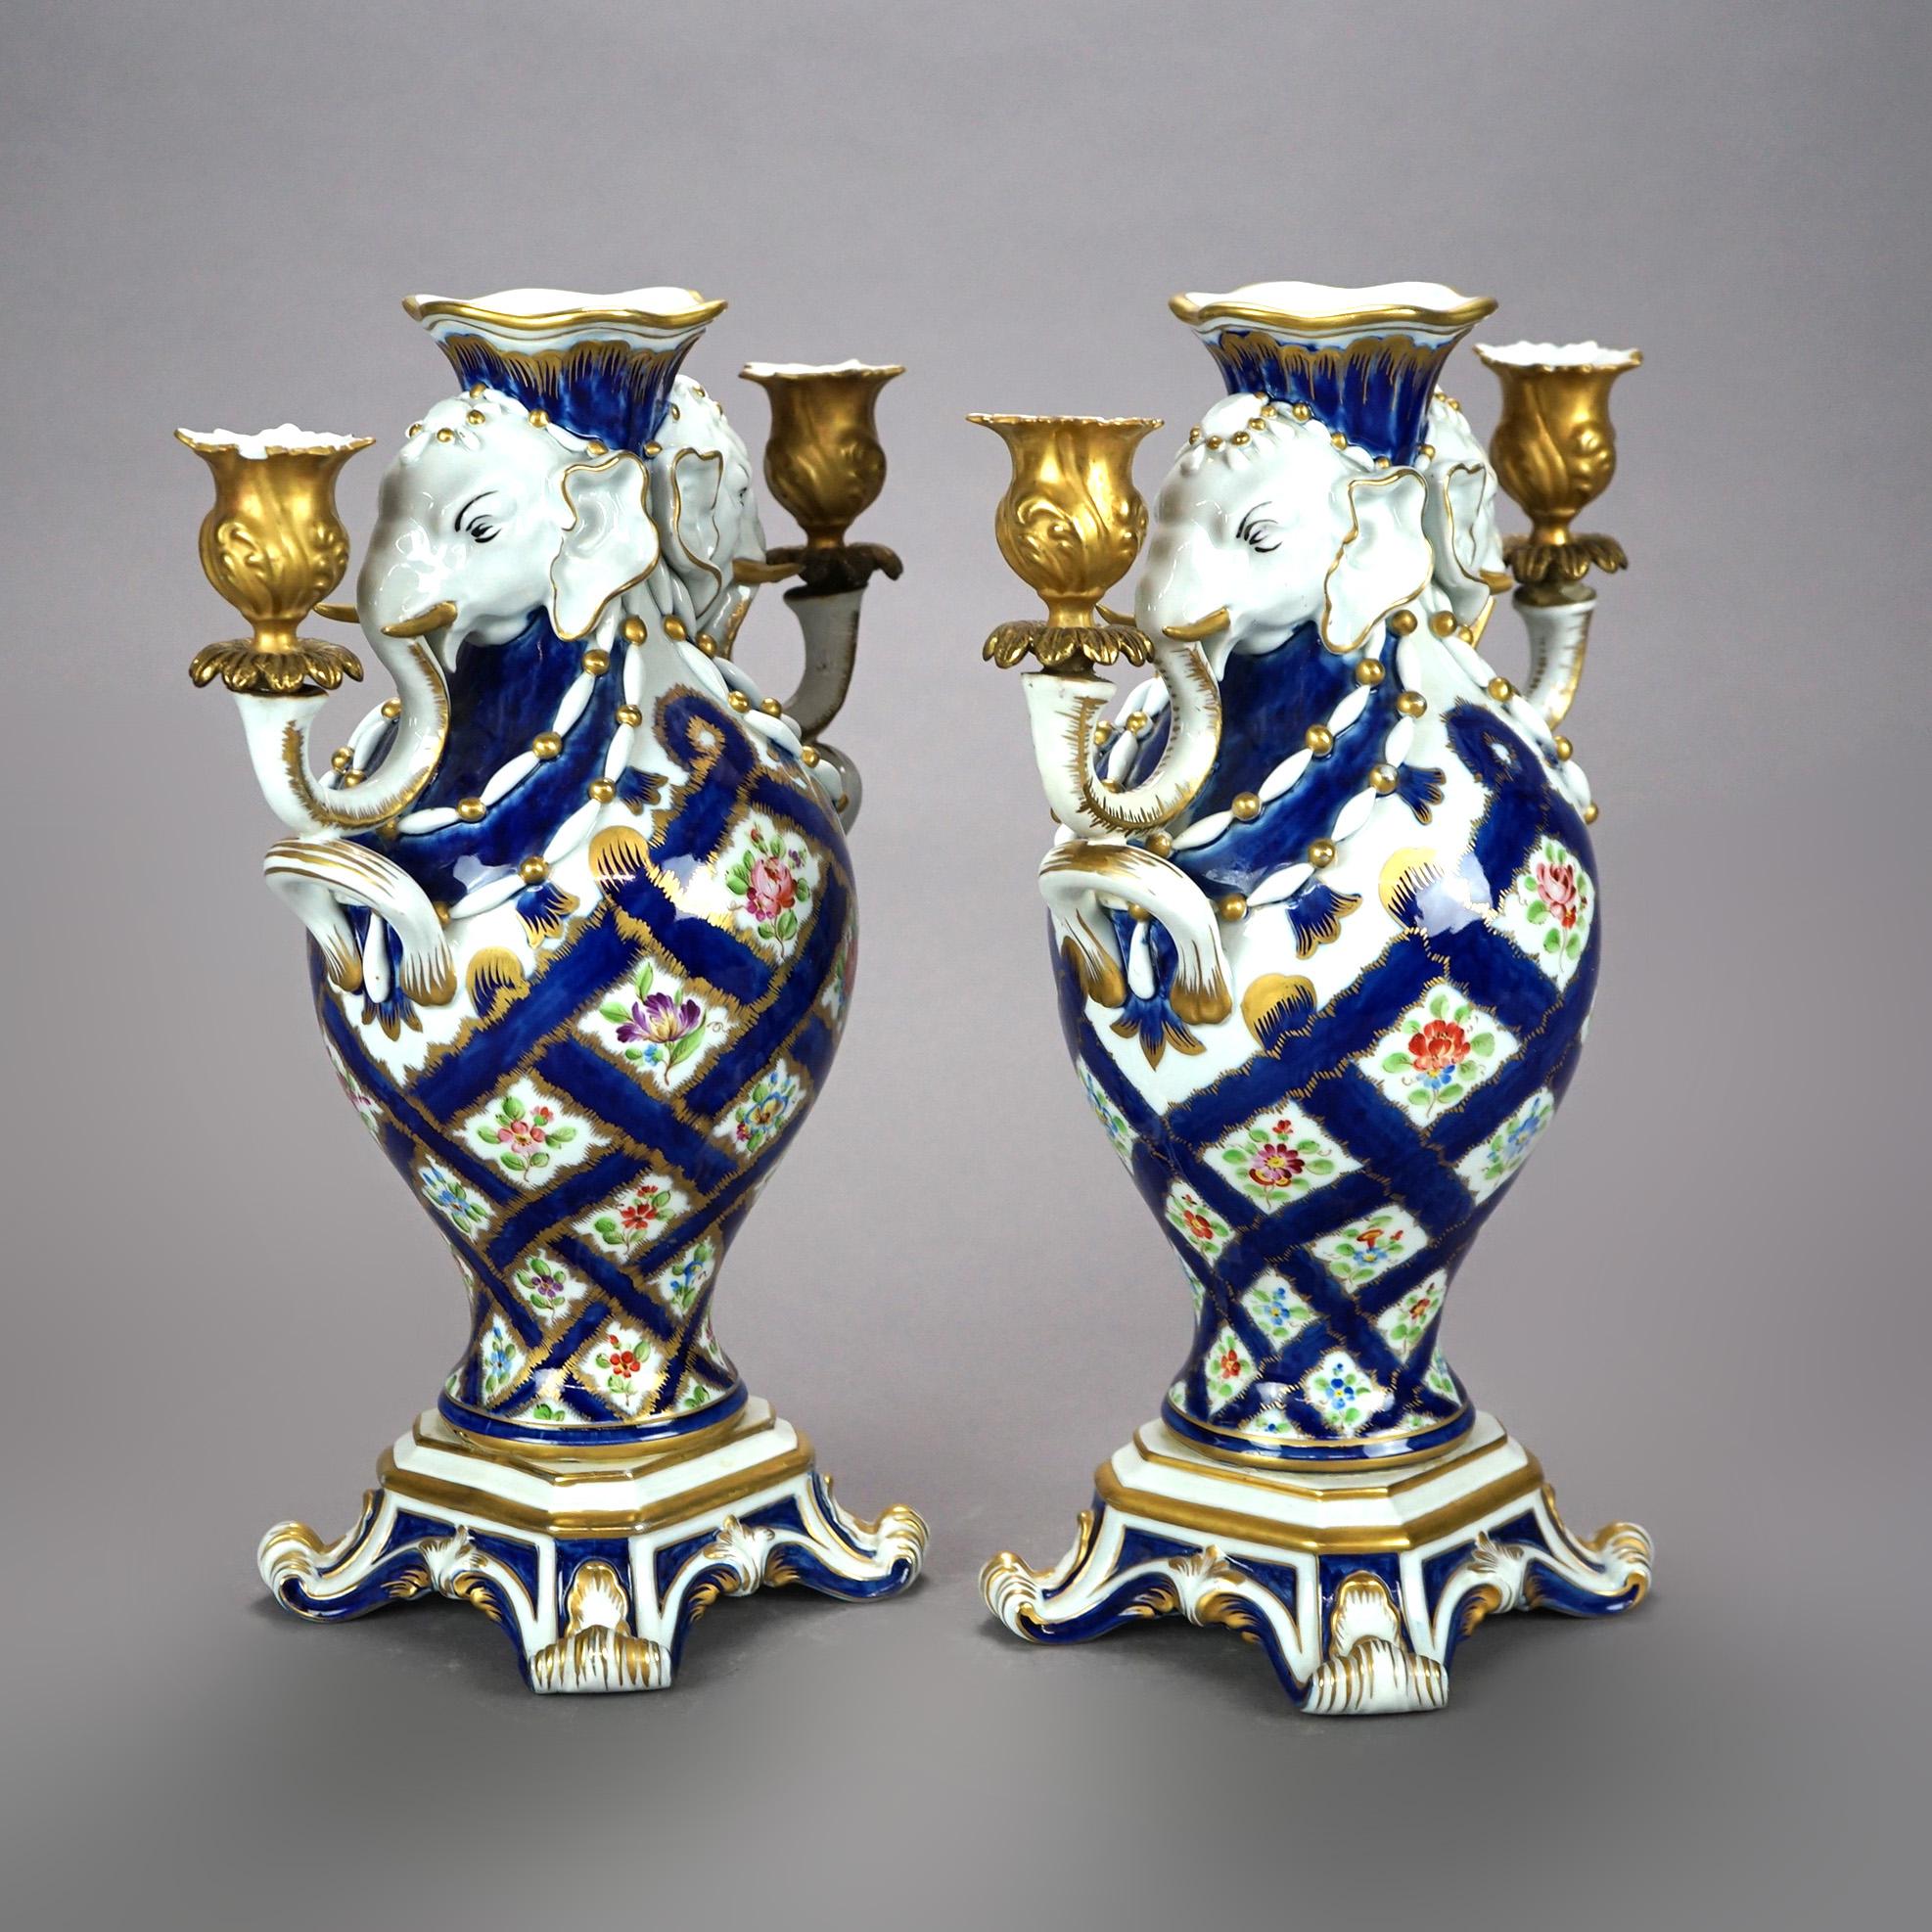 An antique pair of figural Italian candelabra urns offer porcelain construction with cobalt lattice pattern with flowers, flanking elephant candle holders, raised on footed base, gilt highlights throughout, maker mark on base 